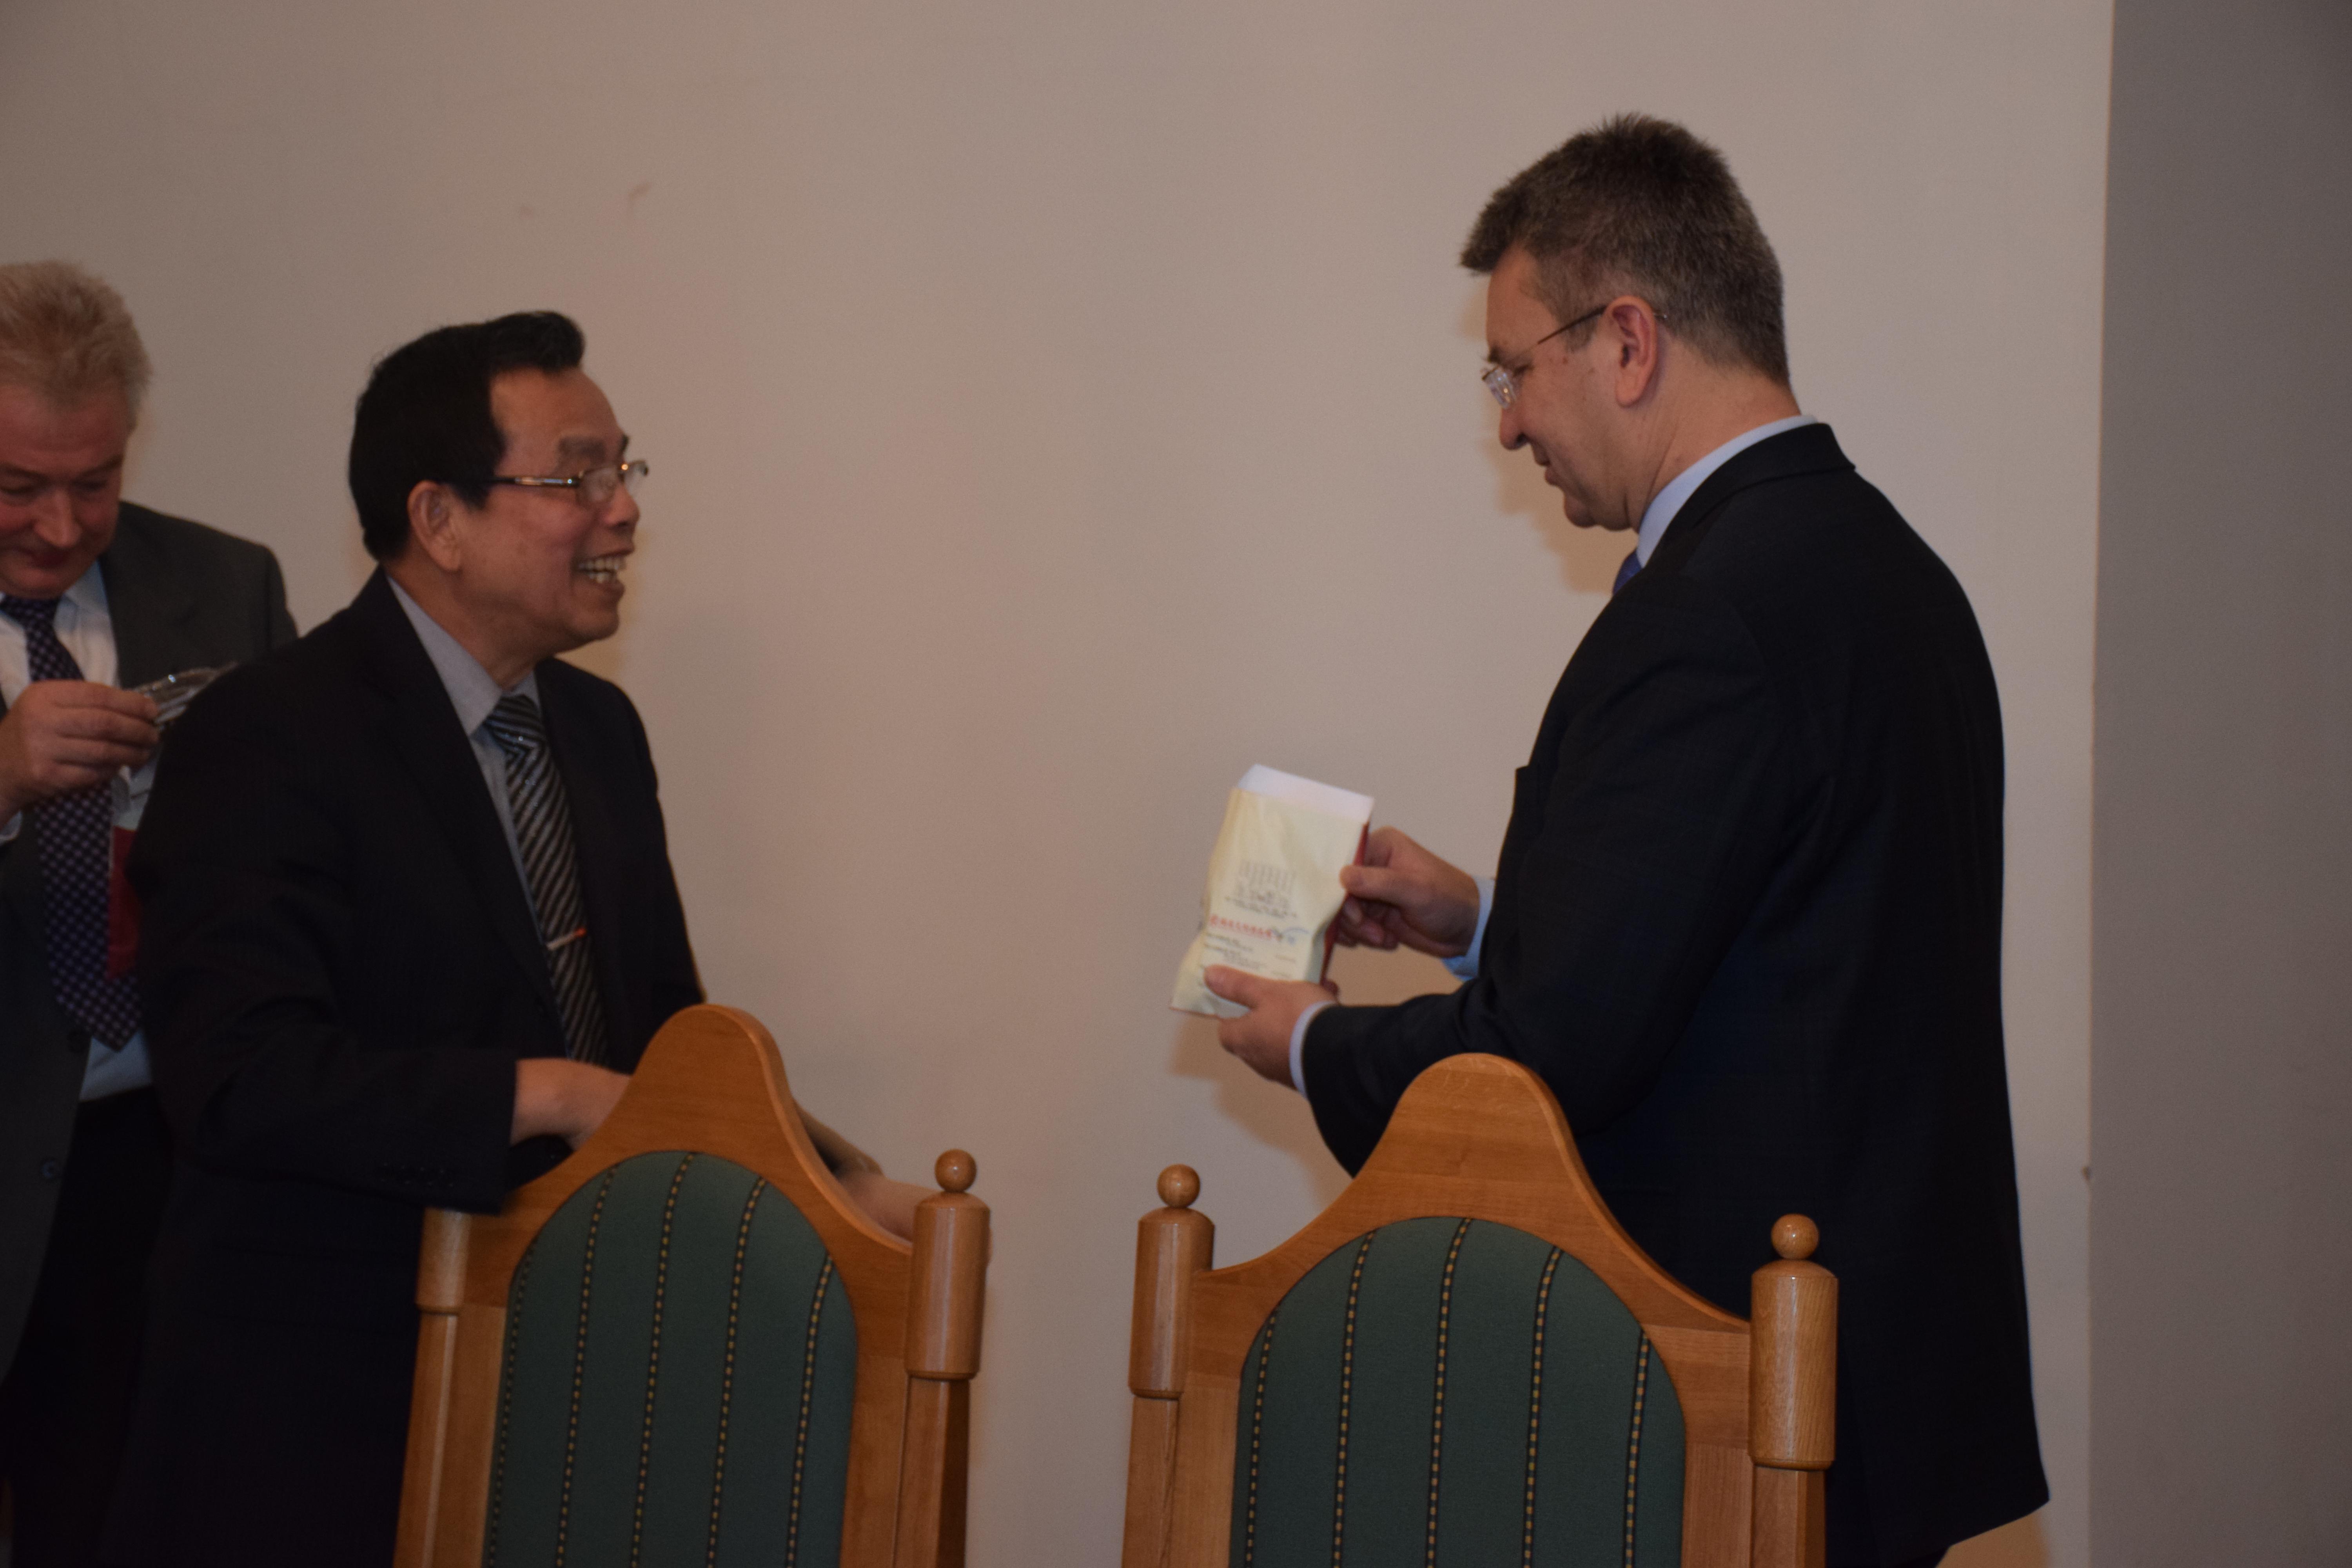 Head of the Taipei Mission in the Republic of Latvia Mr. Rong-Chuan Wu presented a souvenir to Vice-rector of Latvia University of Agriculture Mr. Aigars Laizans. 